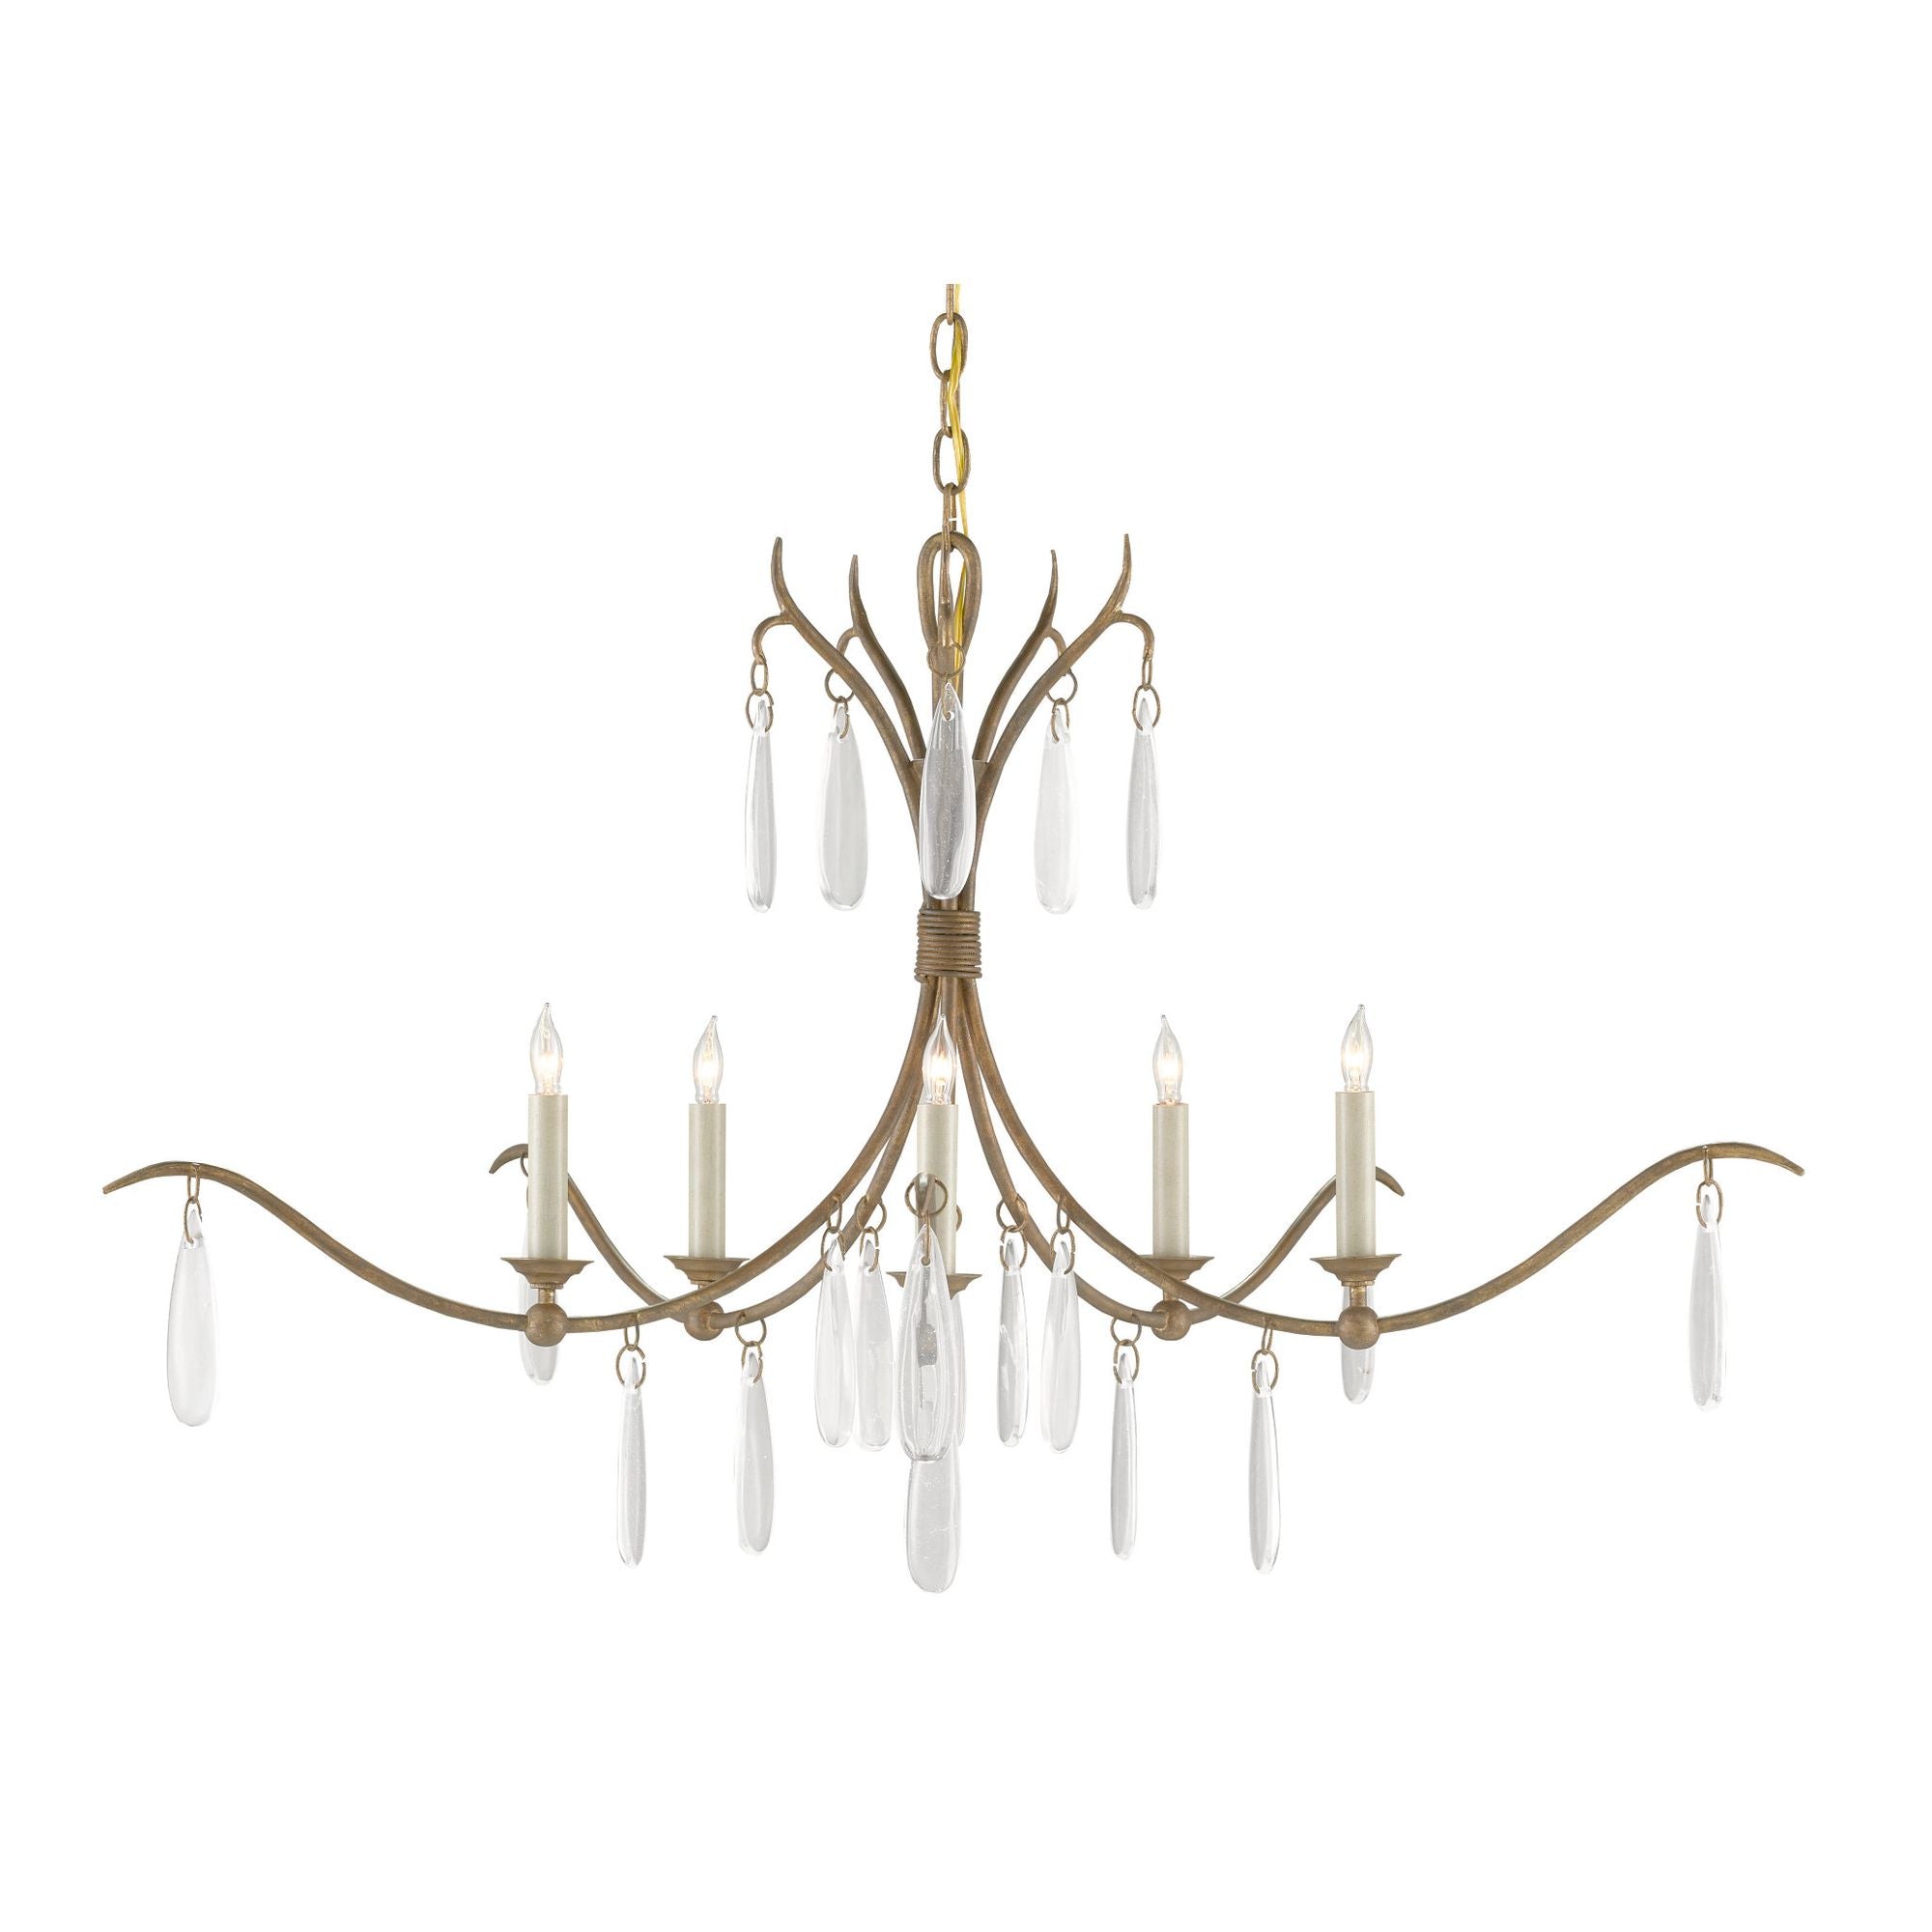 Marshallia Small Brass Chandelier - Rustic Gold/Faux Rock Crystal